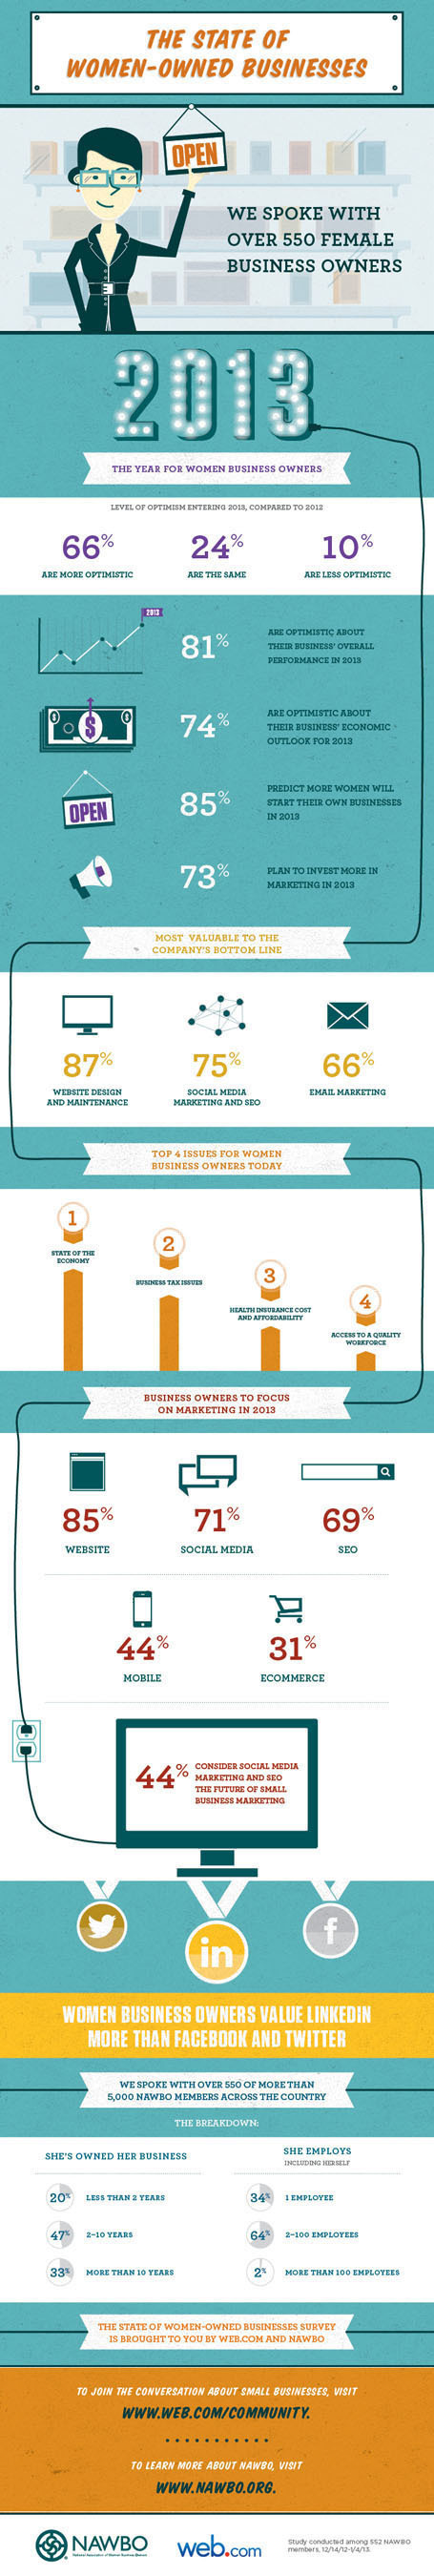 WEB.COM NATIONAL ASSOCIATION OF WOMEN BUSINESS OWNERS INFOGRAPHIC